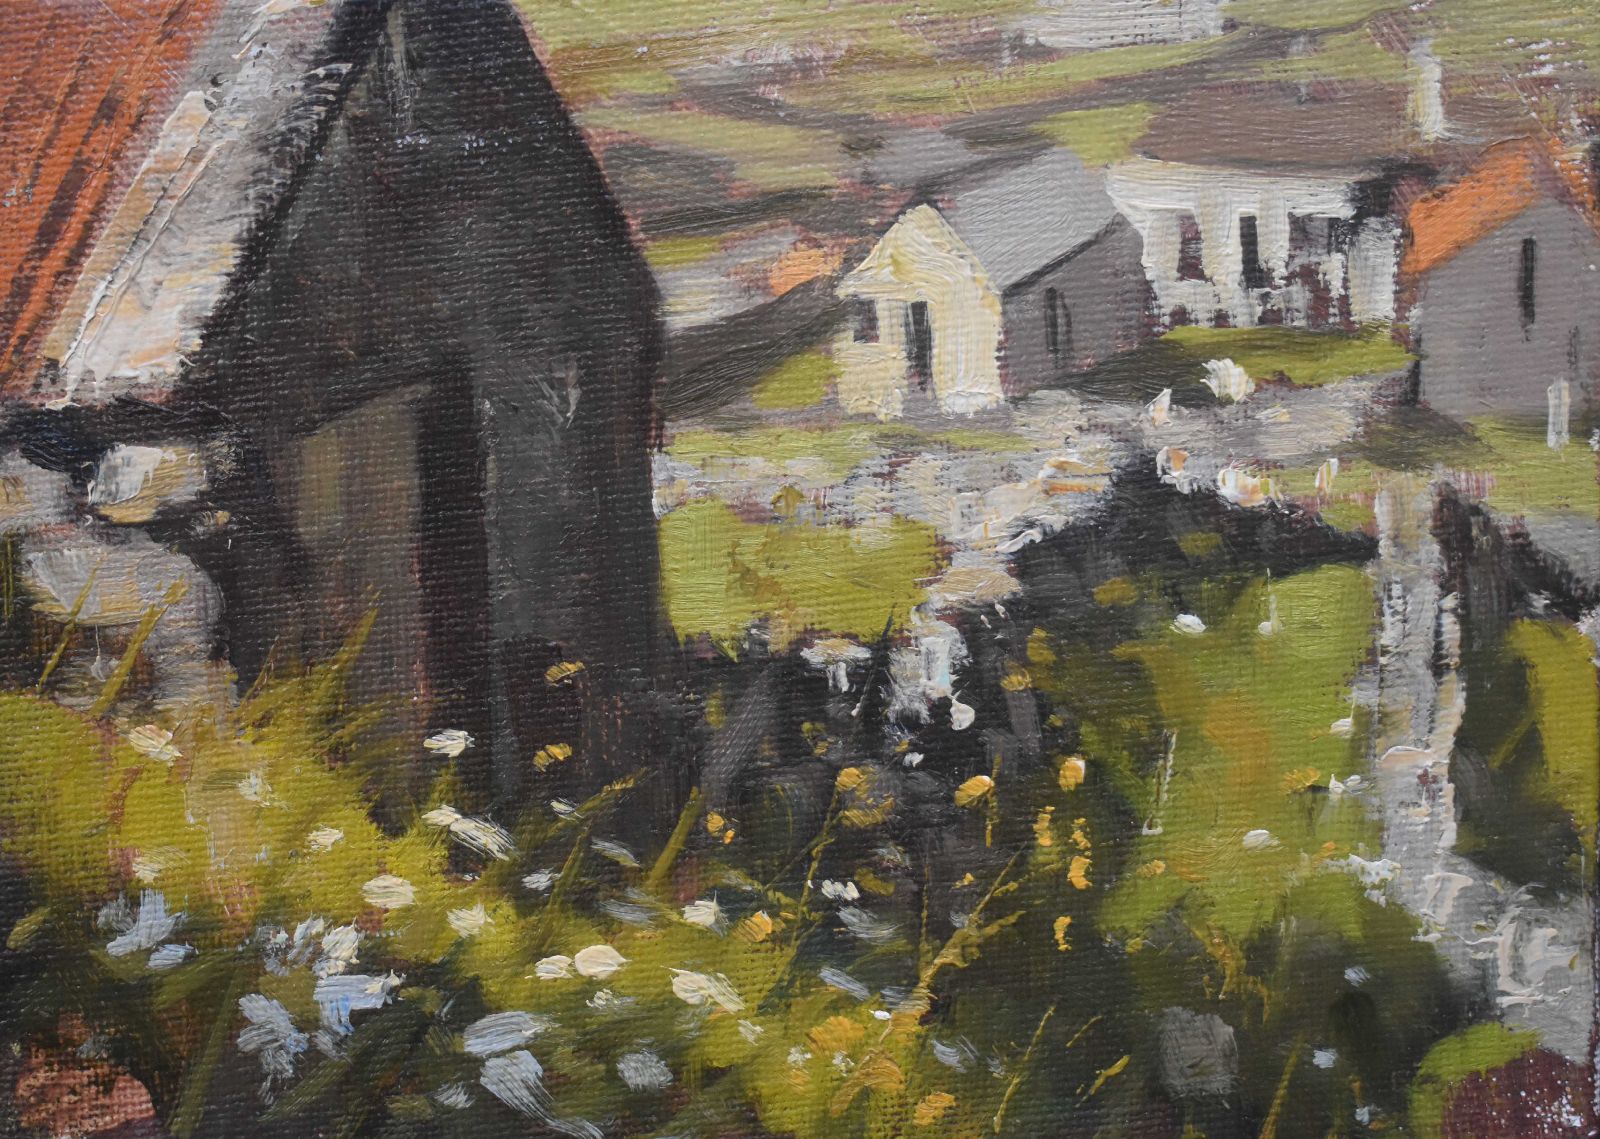 Fields Inishmaan by Dave West